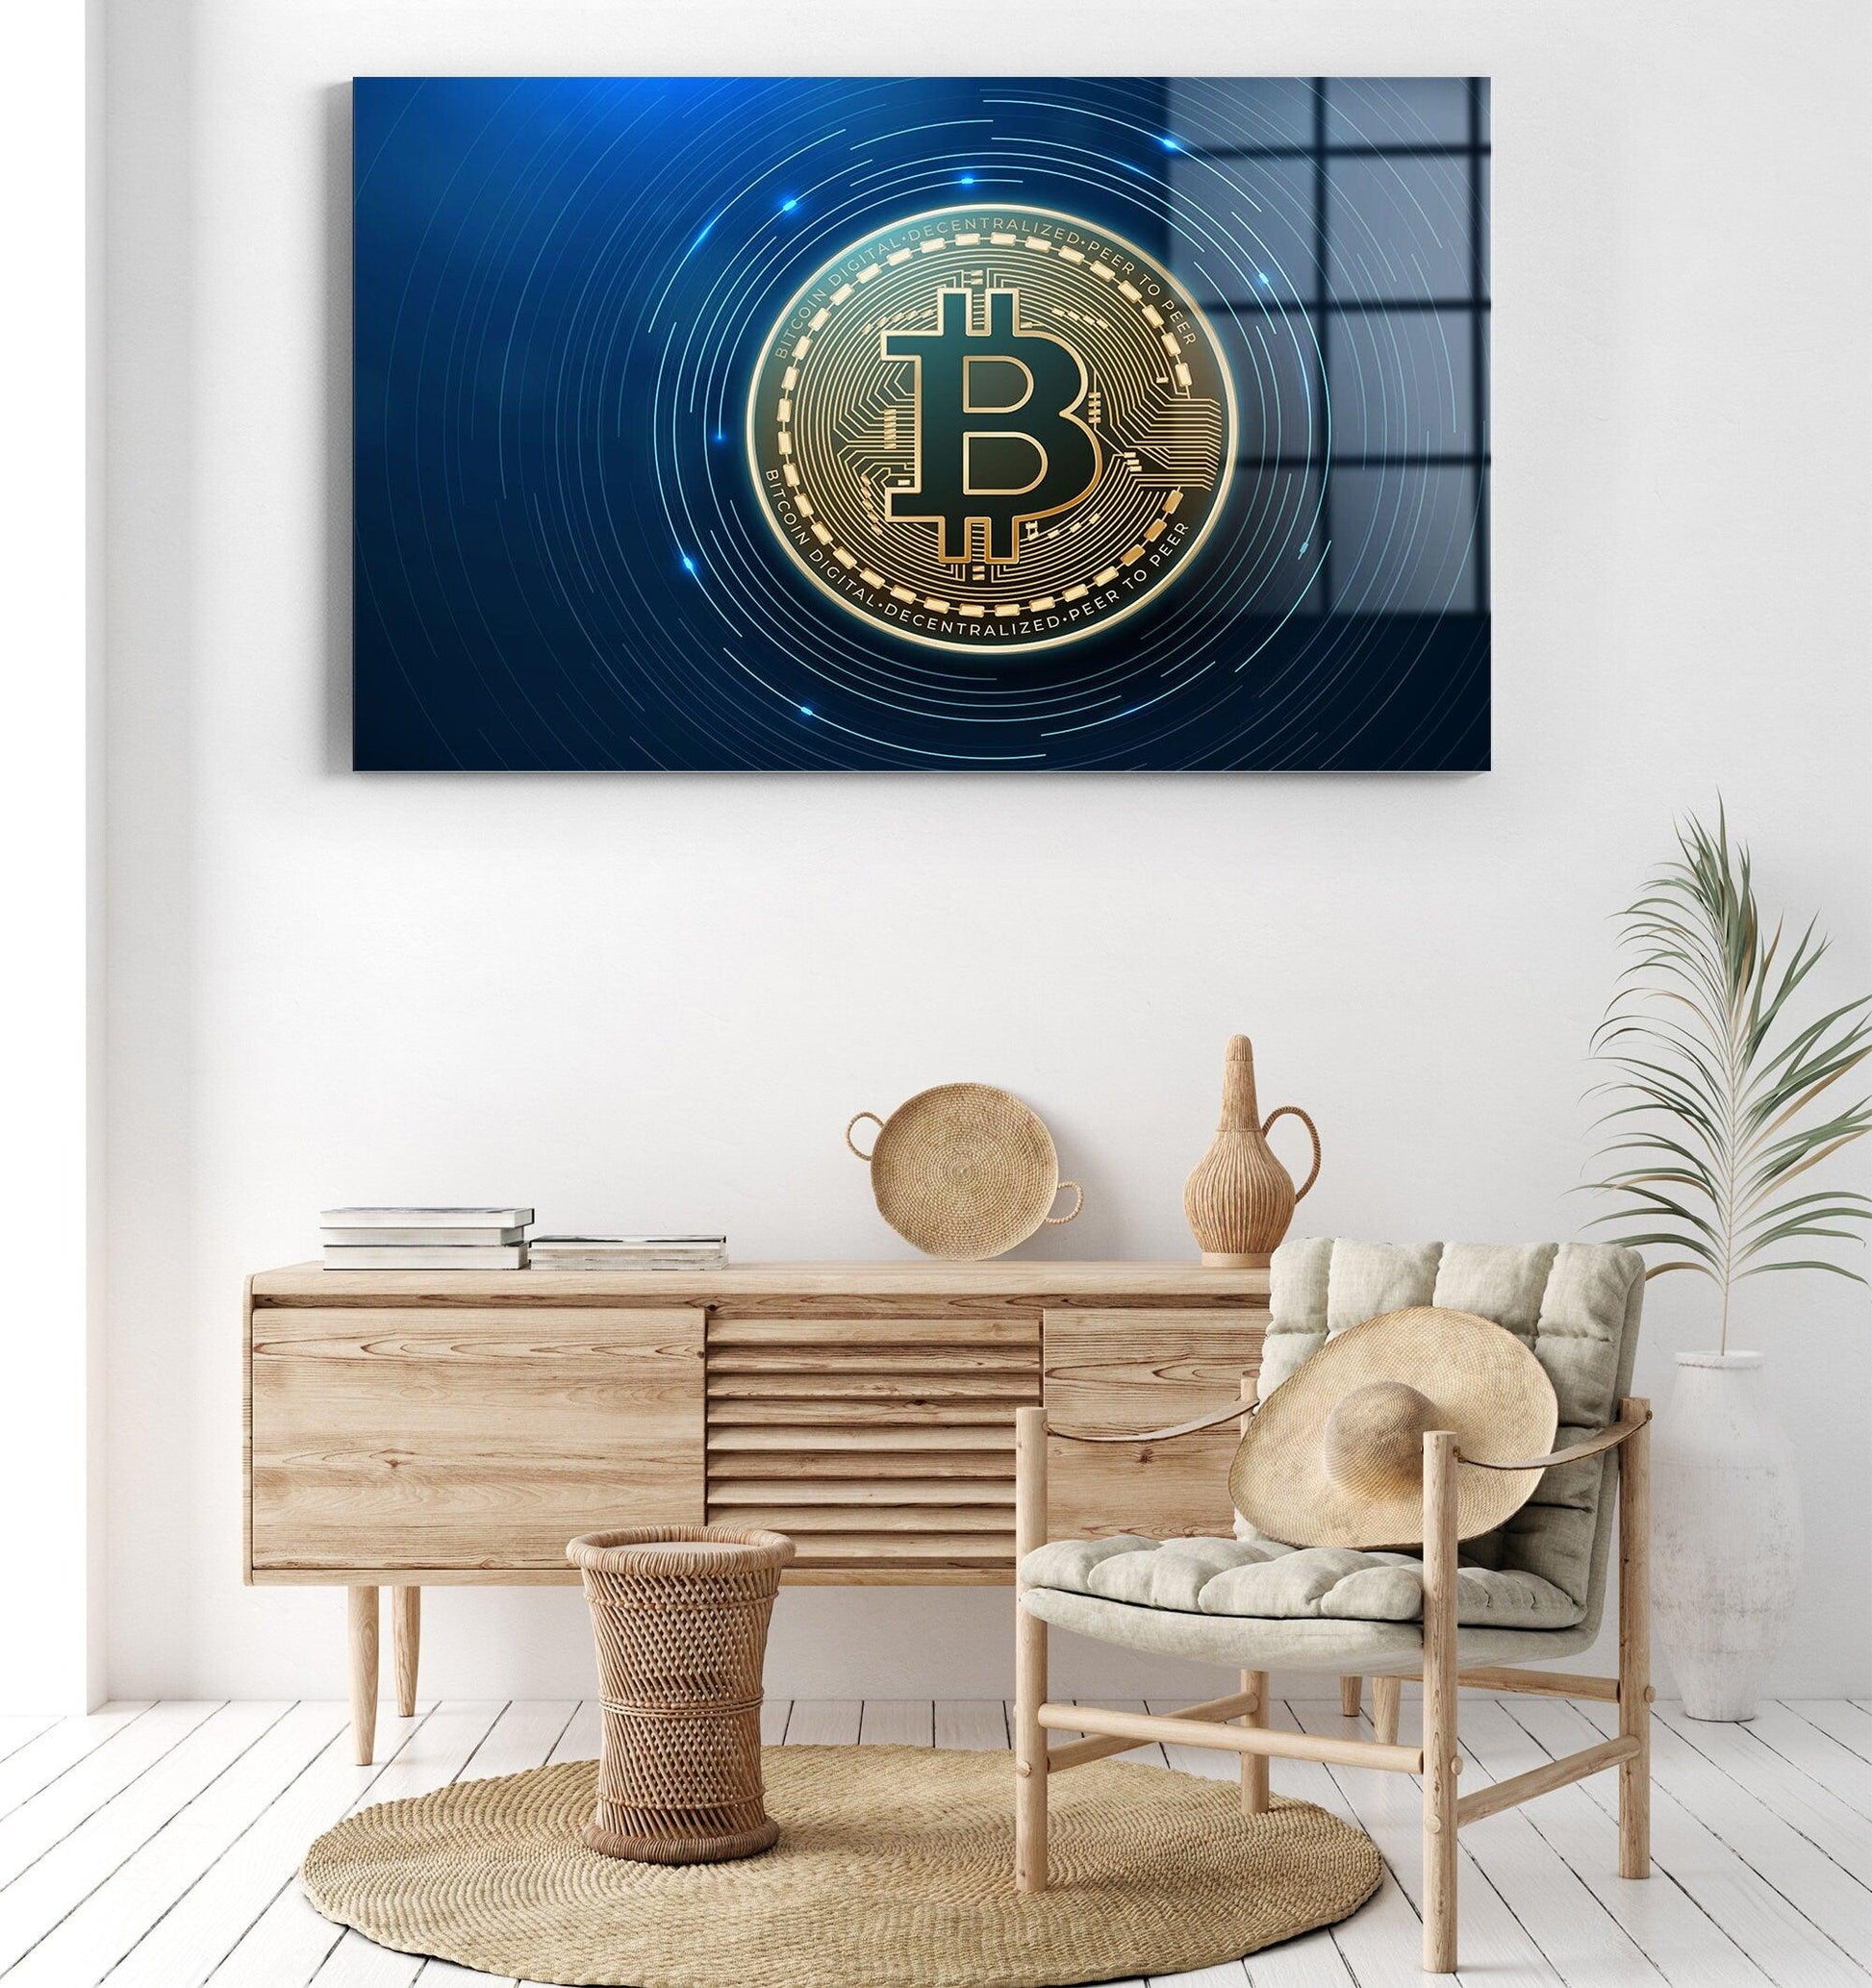 Large Bitcoin Canvas Art, Cryptocurrency Trader Gift, Bitcoin Wall Decor, Bitcoin canvas wall art, Bitcoin glass wall decor, office wall art - TrendiArt